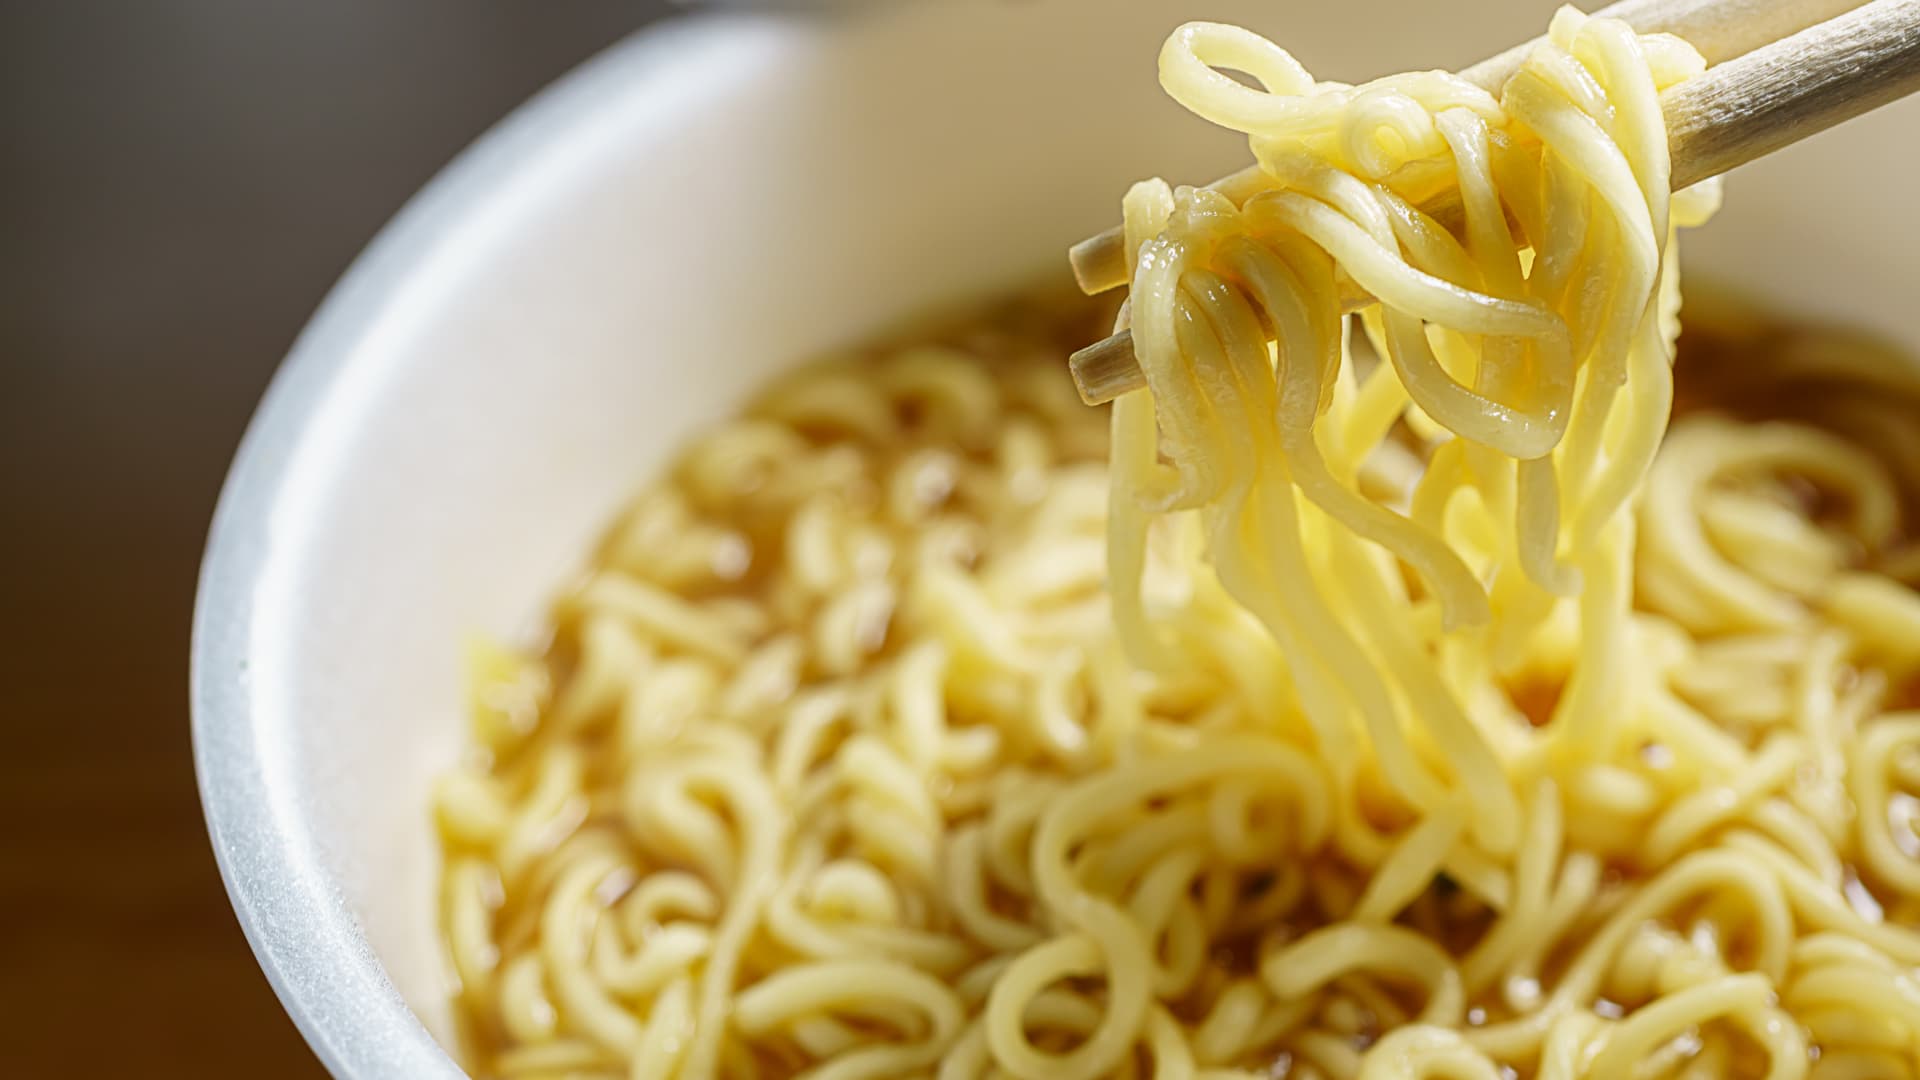 Activist Nihon Global puts forth ideas to build shareholder value at noodle giant Toyo Suisan